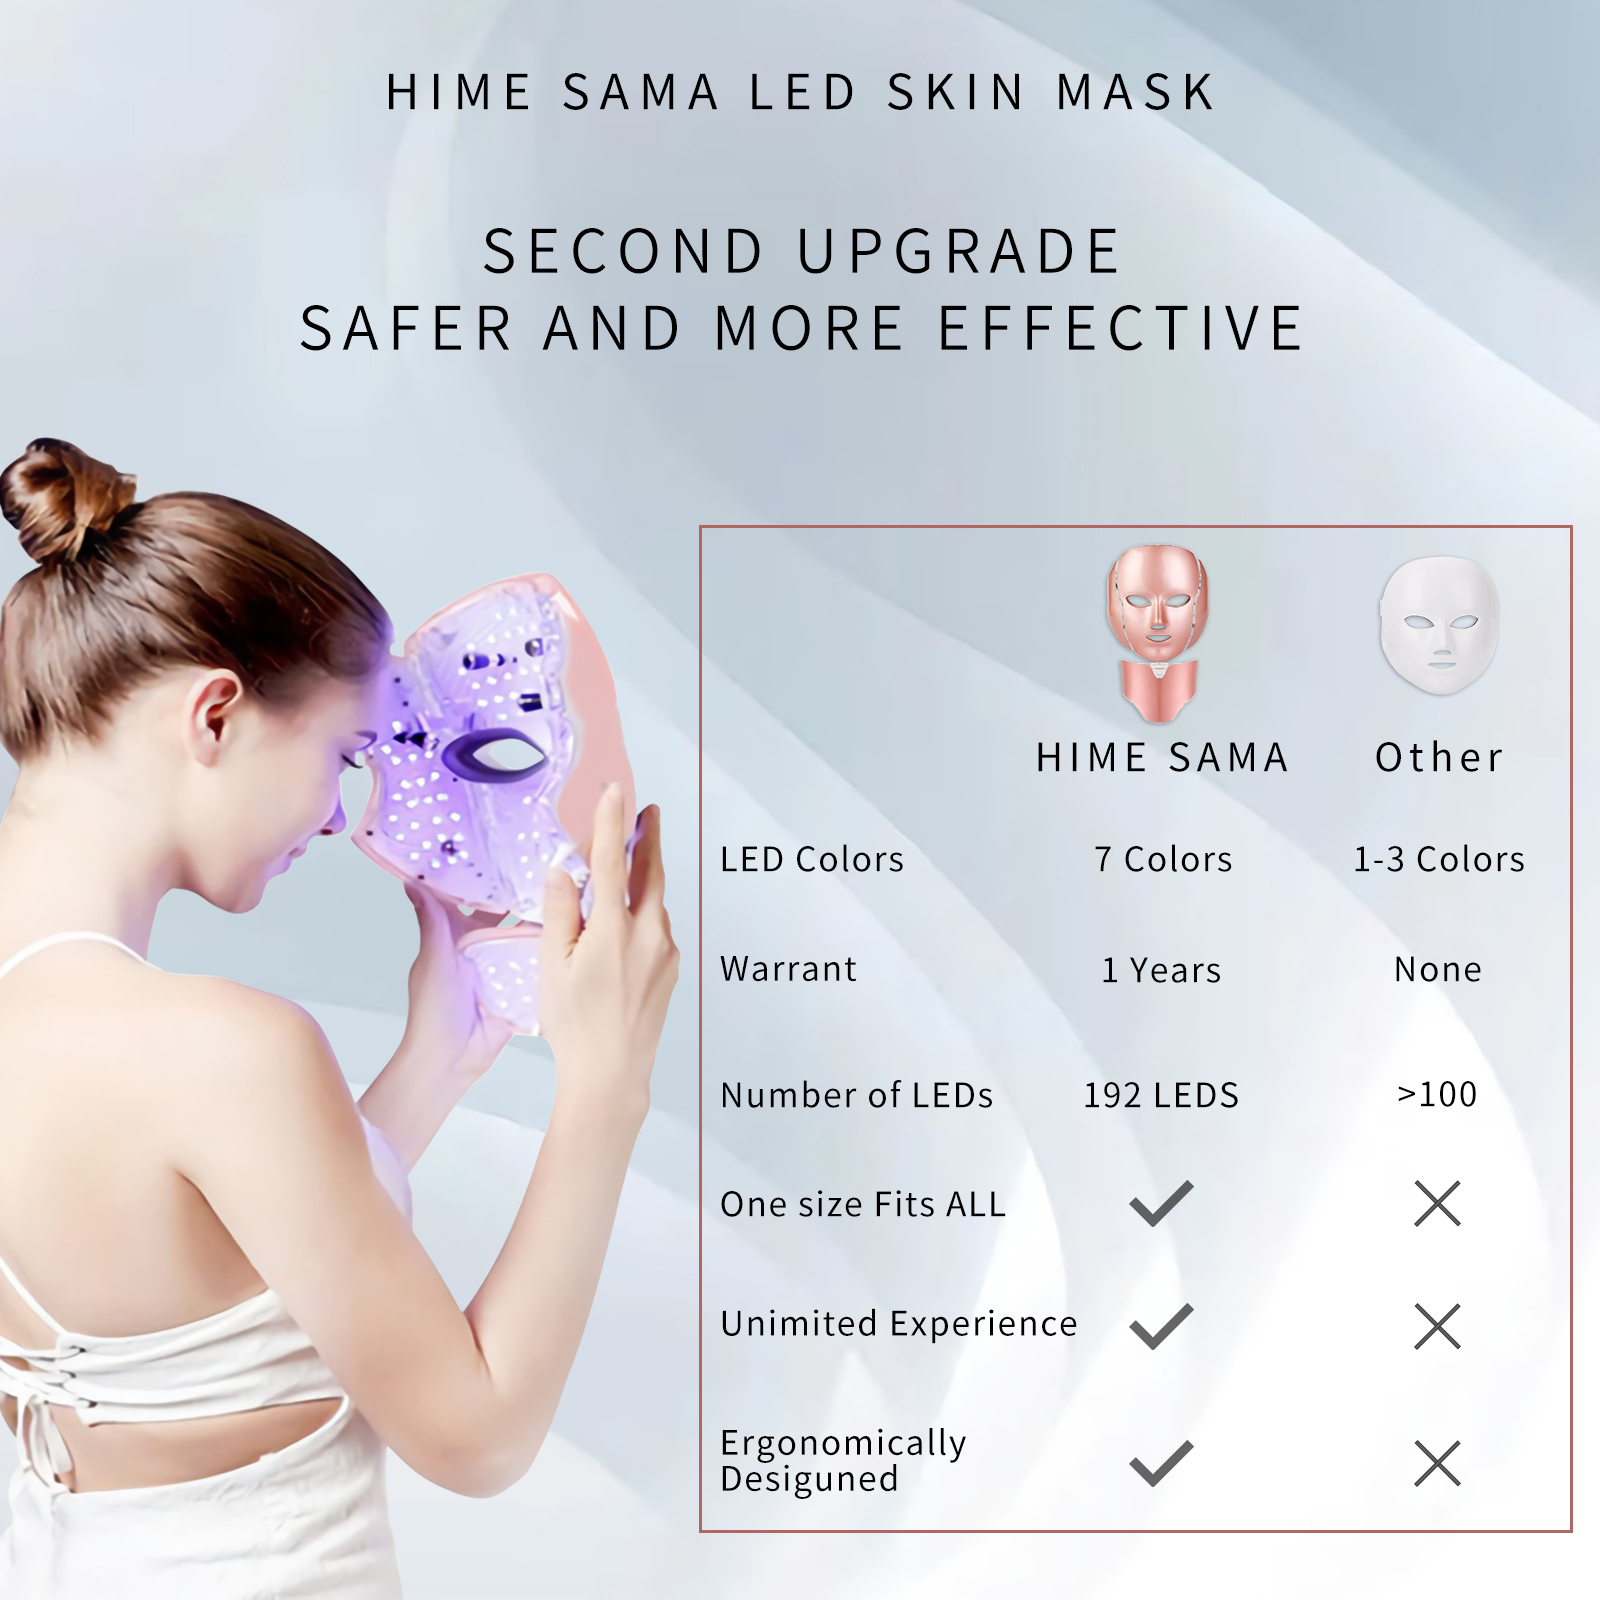 LED Skin Mask-CE Cleared Pro 7 LED Skin Care Mask for Face and Neck Skin Rejuvenation Light Therapy Facial Care Mask and Optical Cosmetic Mask Portable for Home and Travel Use - image 2 of 7